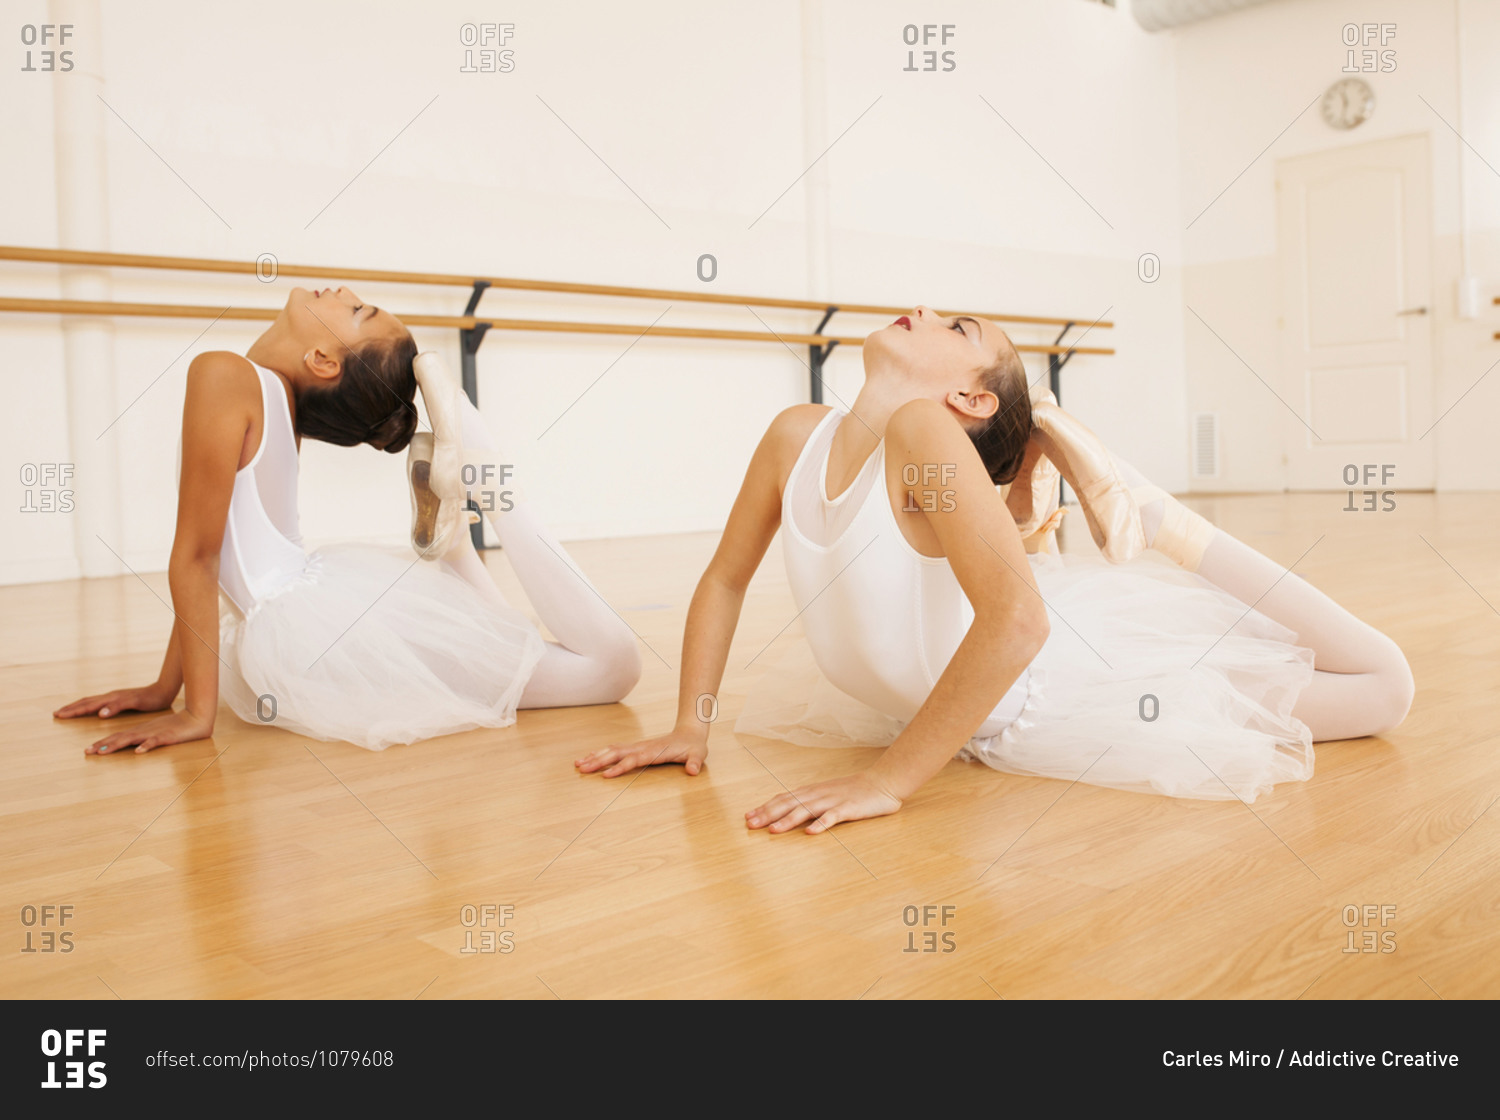 Side view of teenage ballet dancers in tutu and pointe shoes stretching body during lesson in dance hall looking up